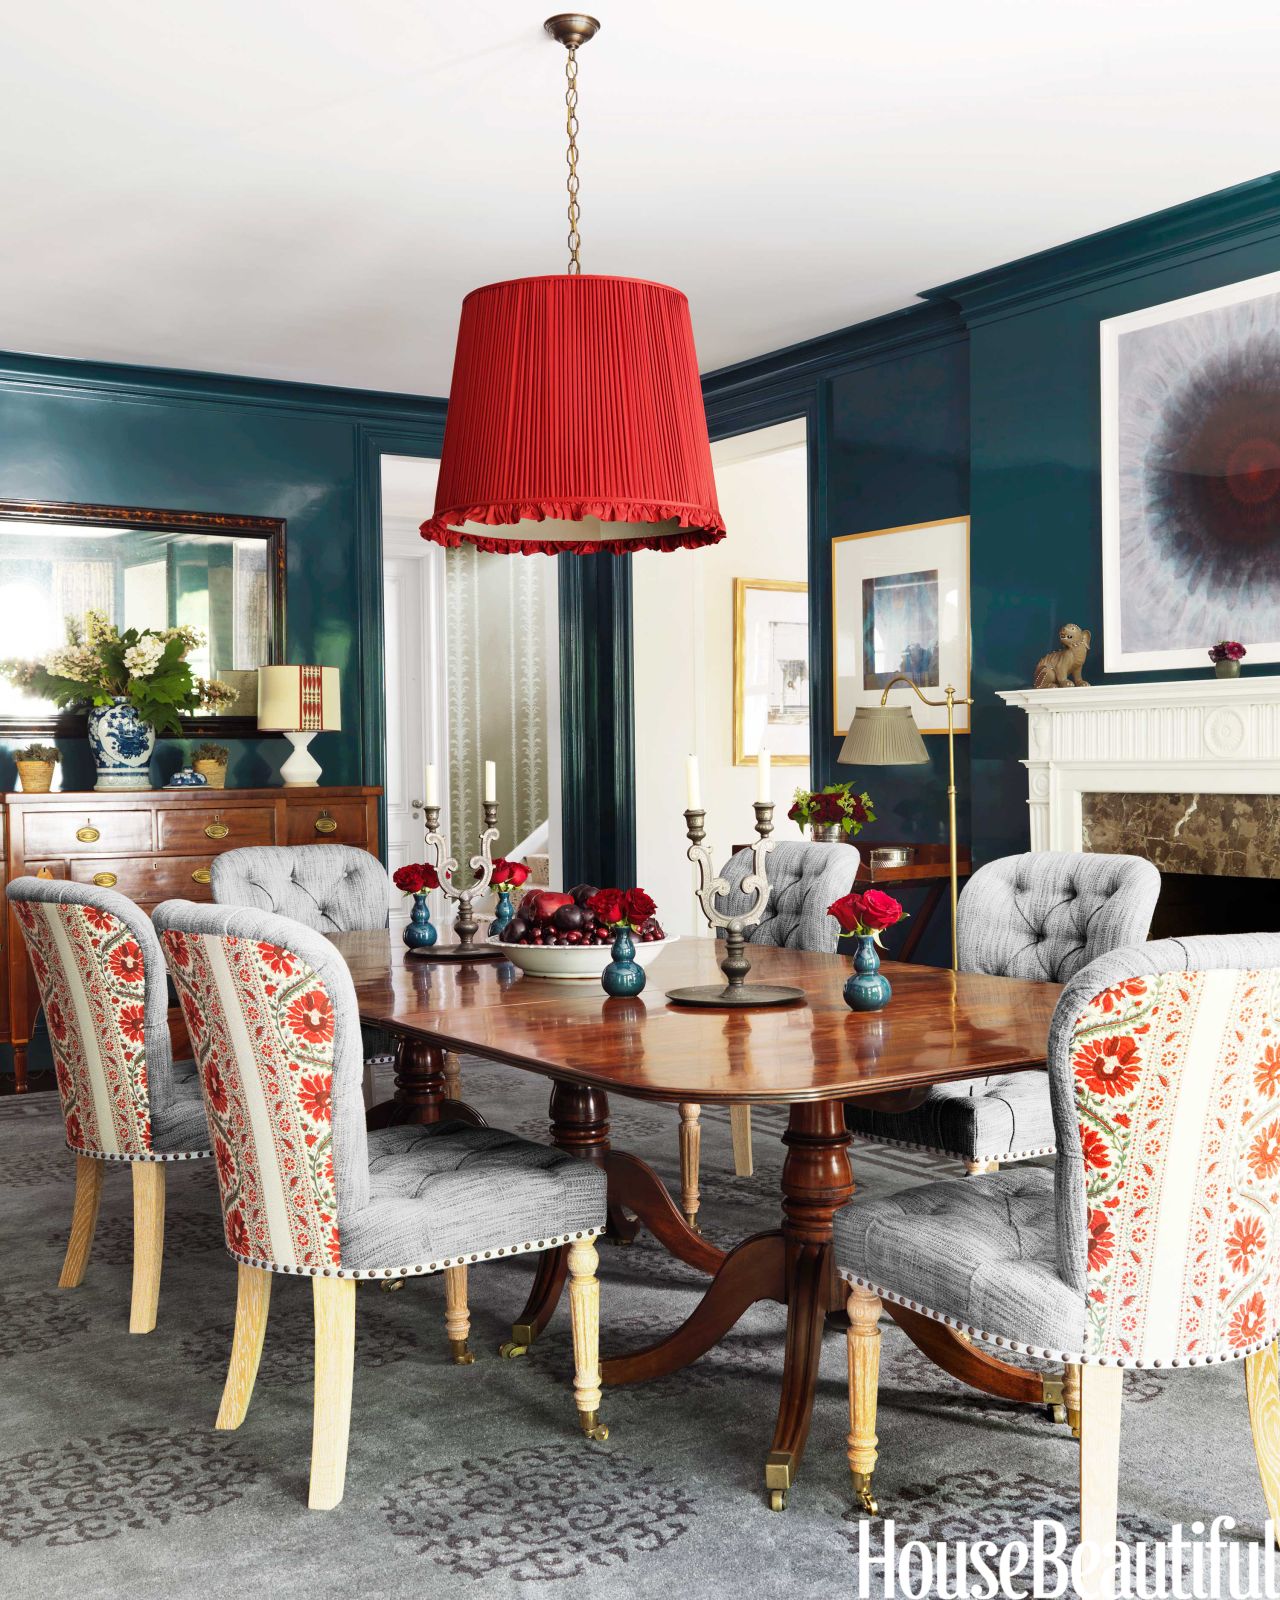 This dining room, decorated by Markham Roberts and featured in the November 2013 issue of House Beautiful, has traditional style and bold color.